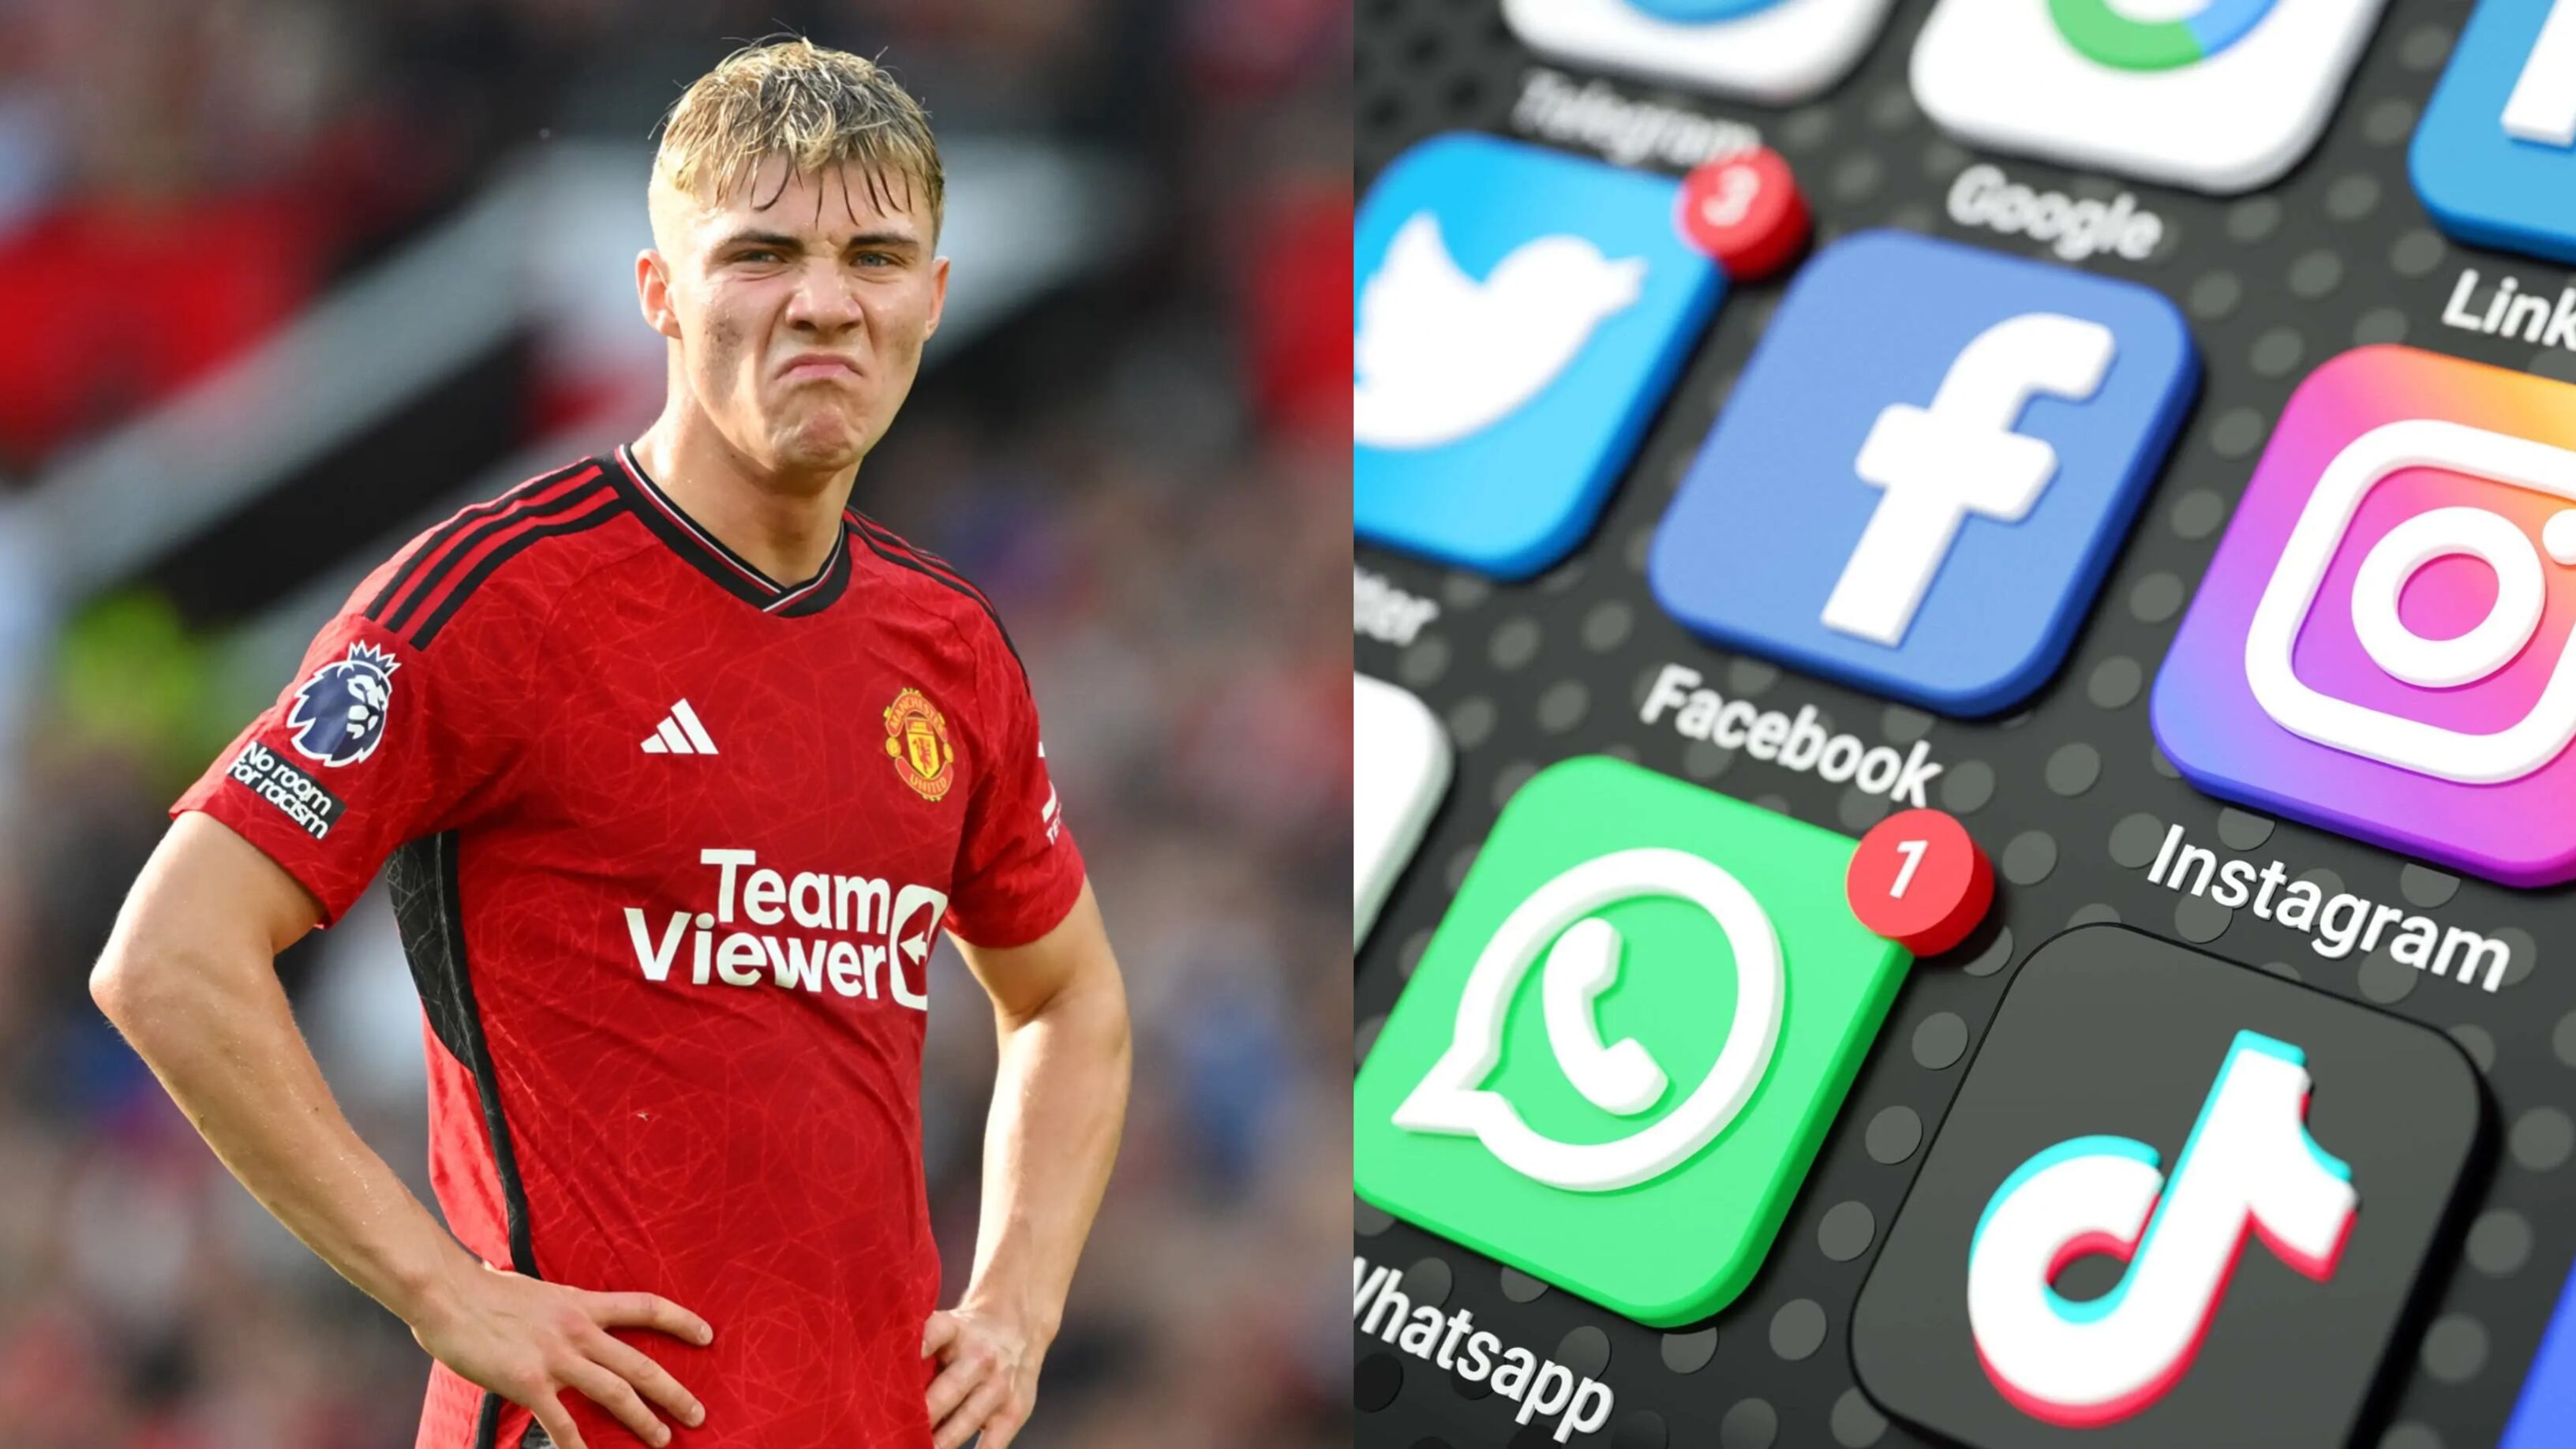 Man Utd players' nickname for Hojlund causes social media controversy